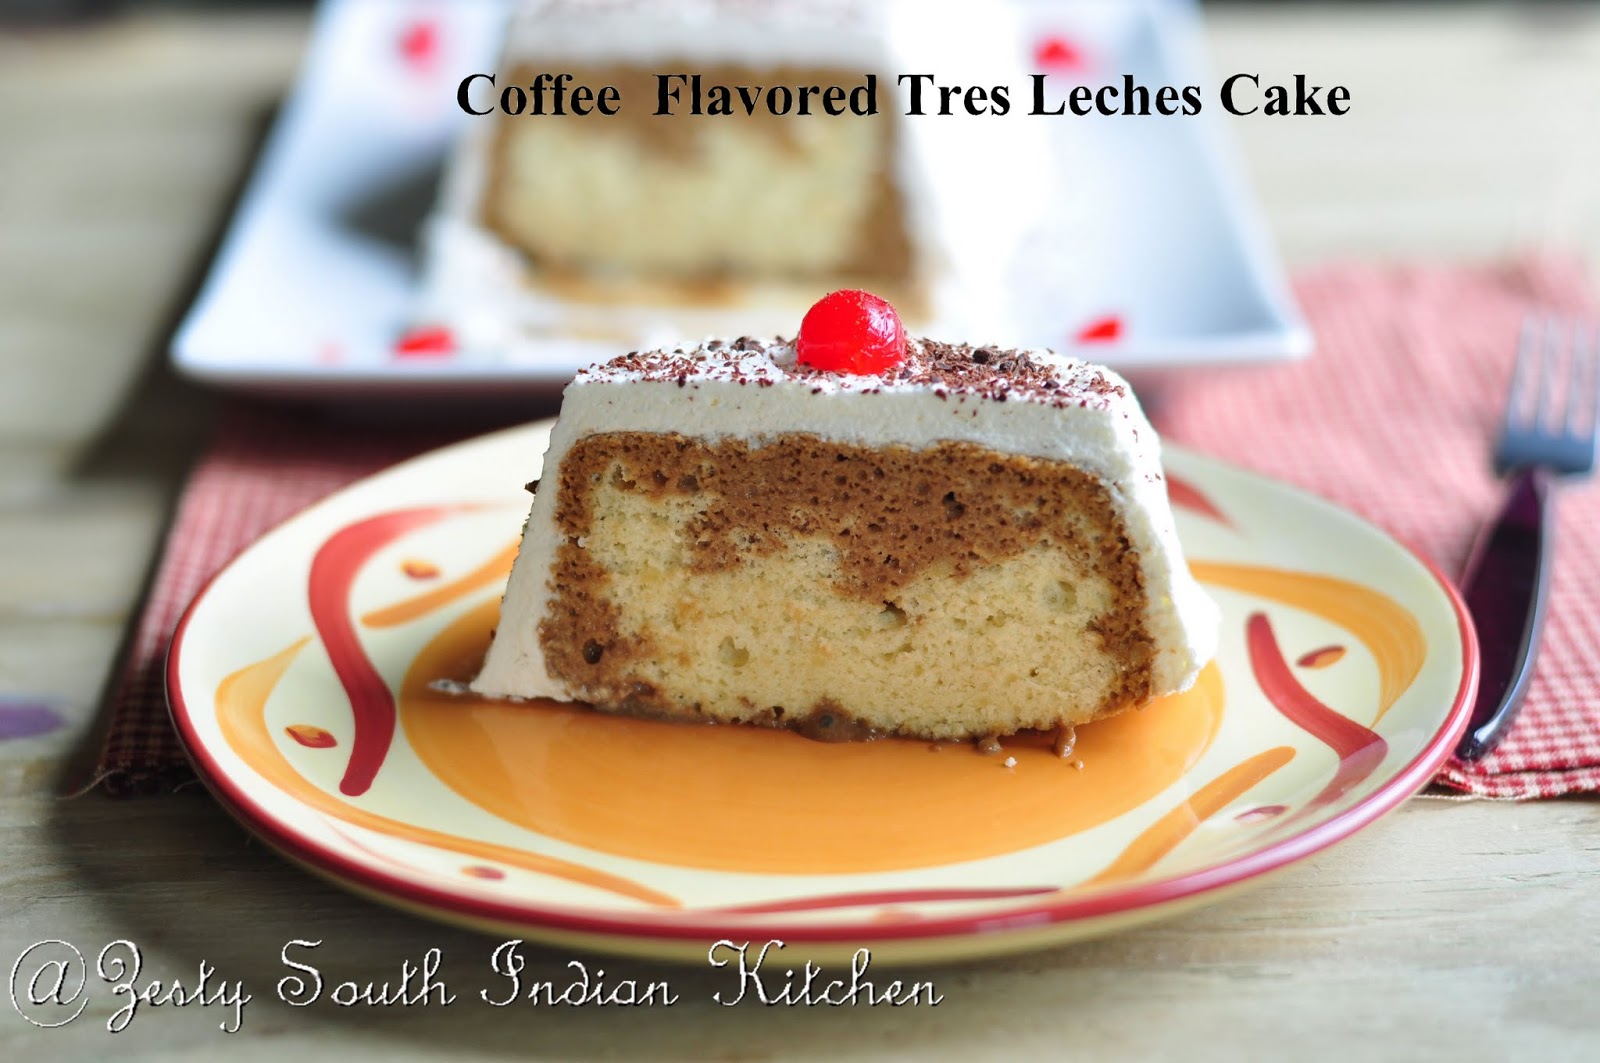 Tres leches pastel con sabor a café /Coffee Flavored Tres Leches Cake -  Zesty South Indian Kitchen